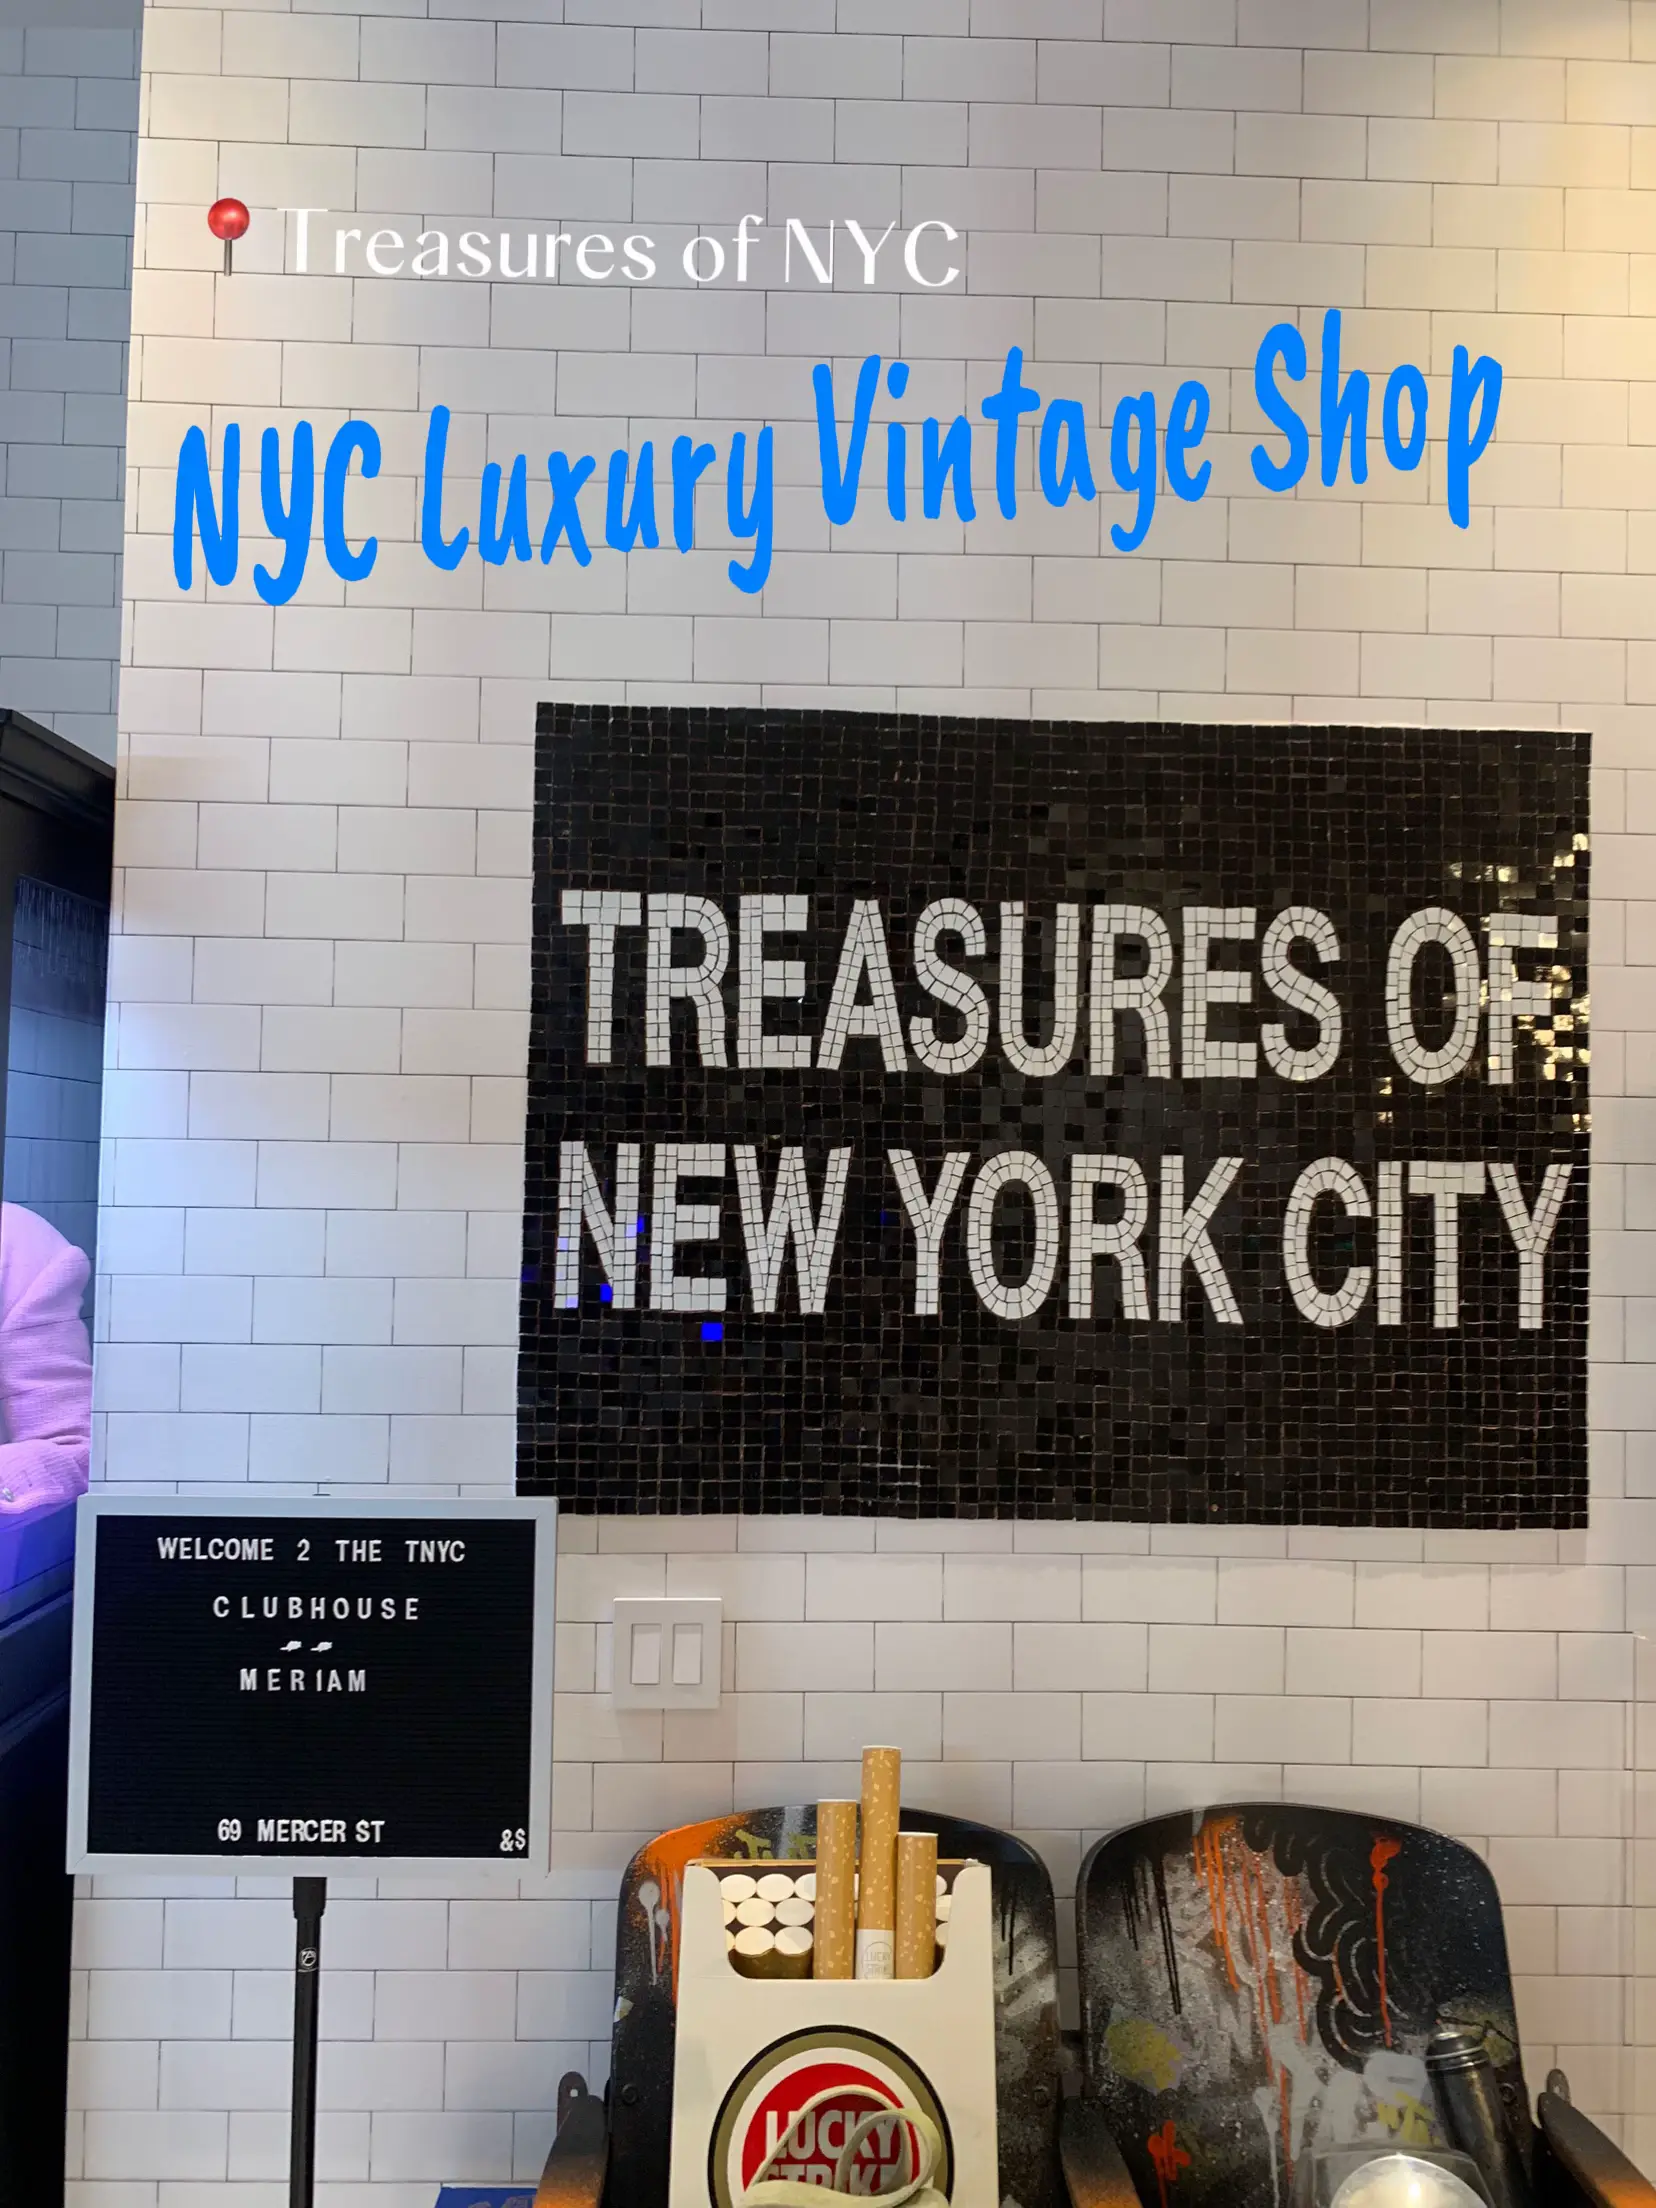 NYC Luxury Vintage Shop: Treasures of NYC, Gallery posted by FashionbyMer